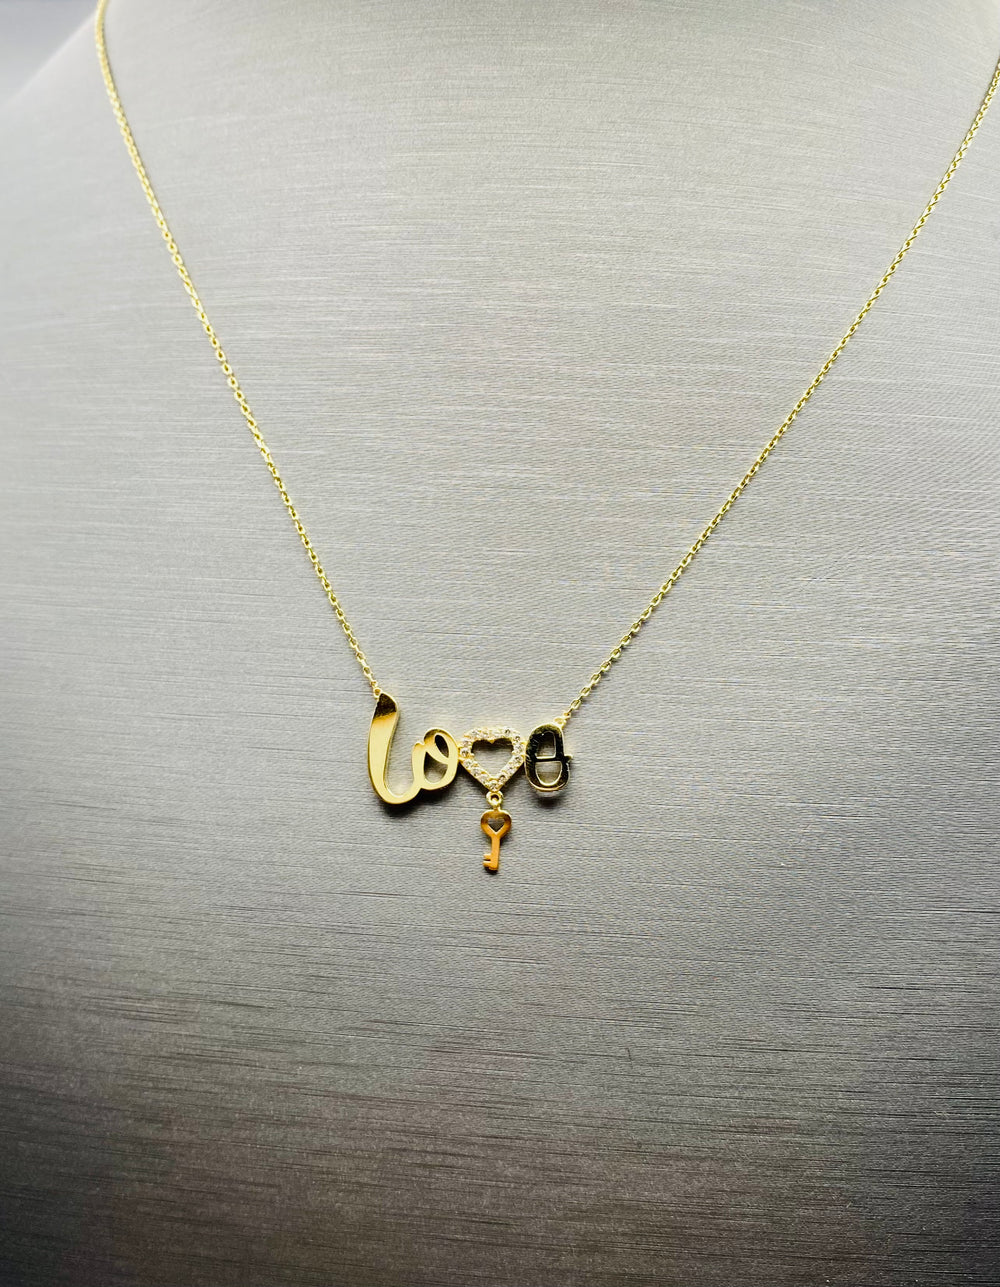 Real 10KT Gold Chain & ‘Love Key’ Charm with Cubic Zirconia Stones